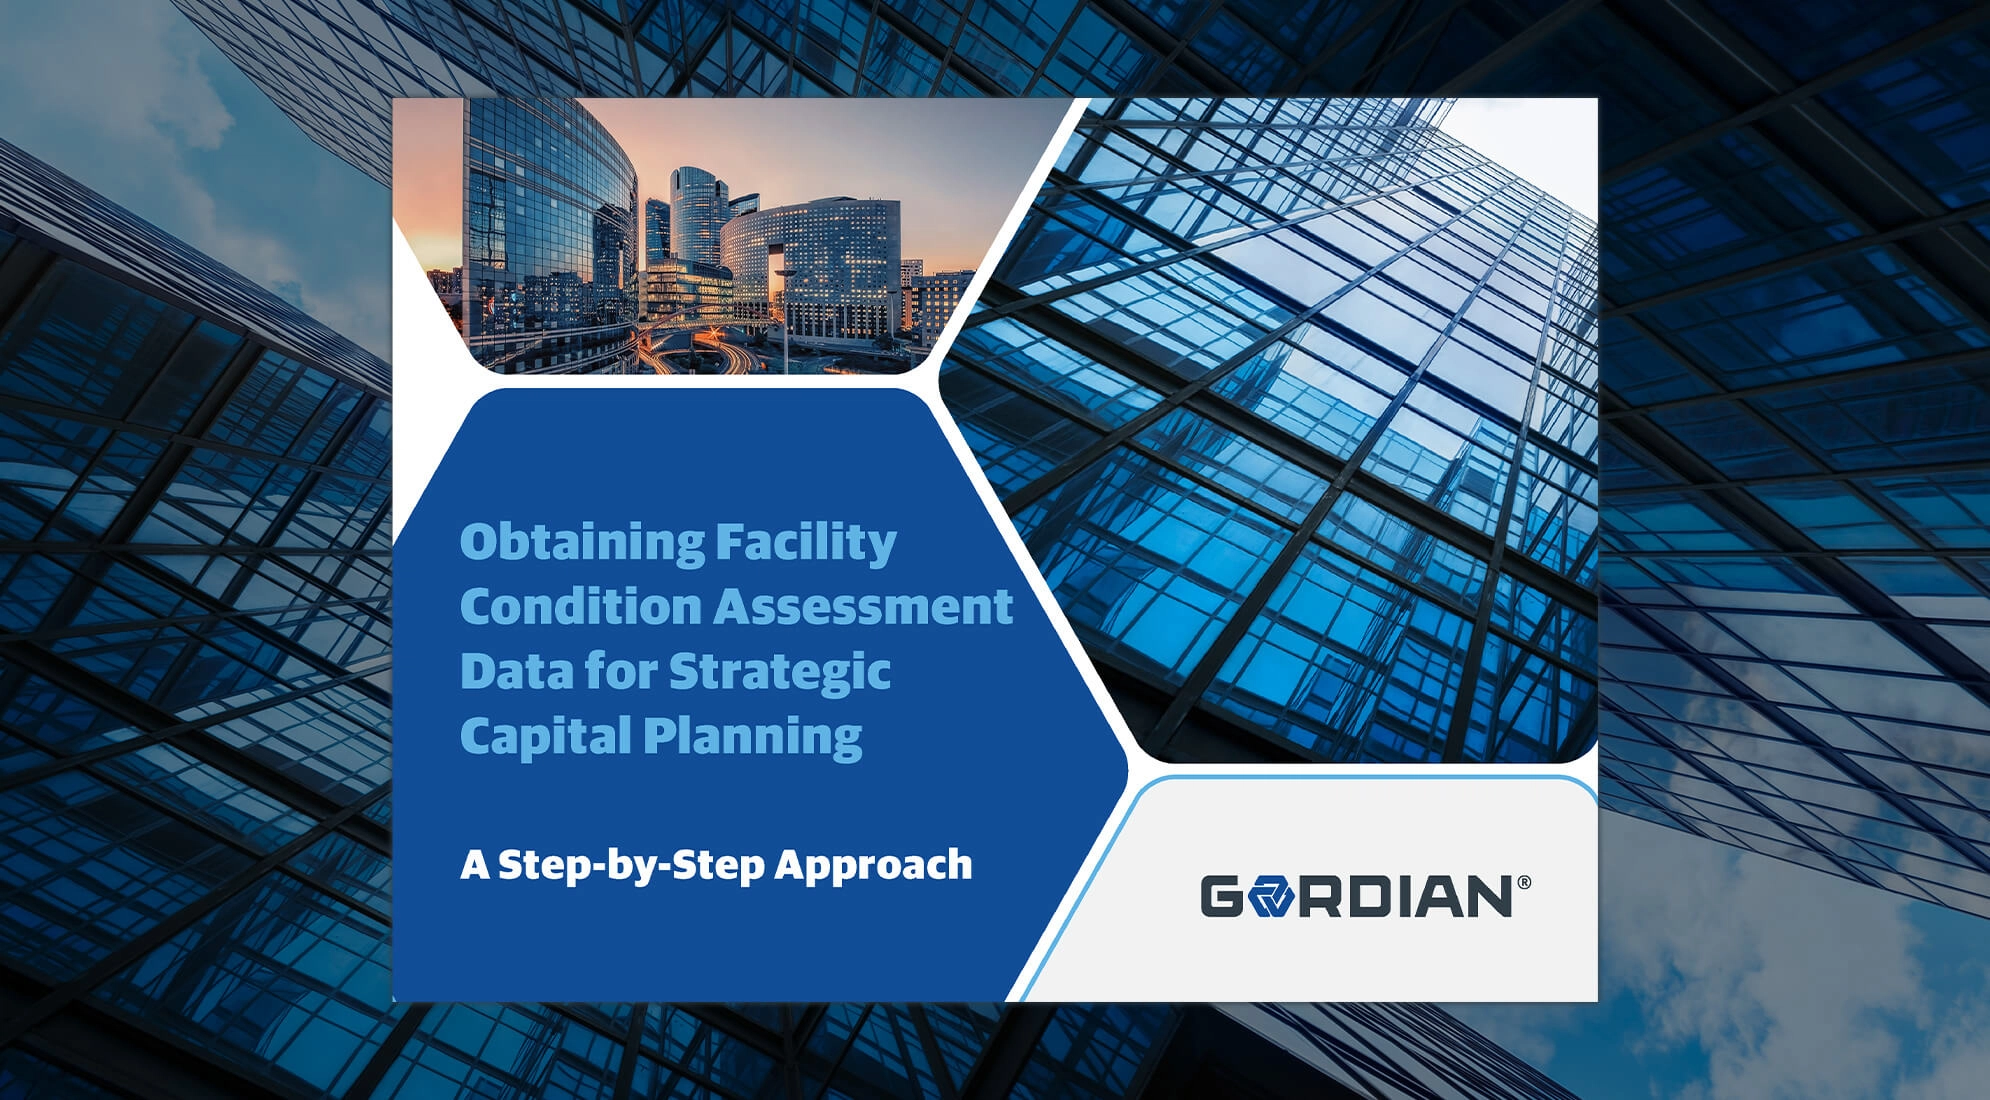 Obtaining Facility Condition Assessment Data for Strategic Capital Planning